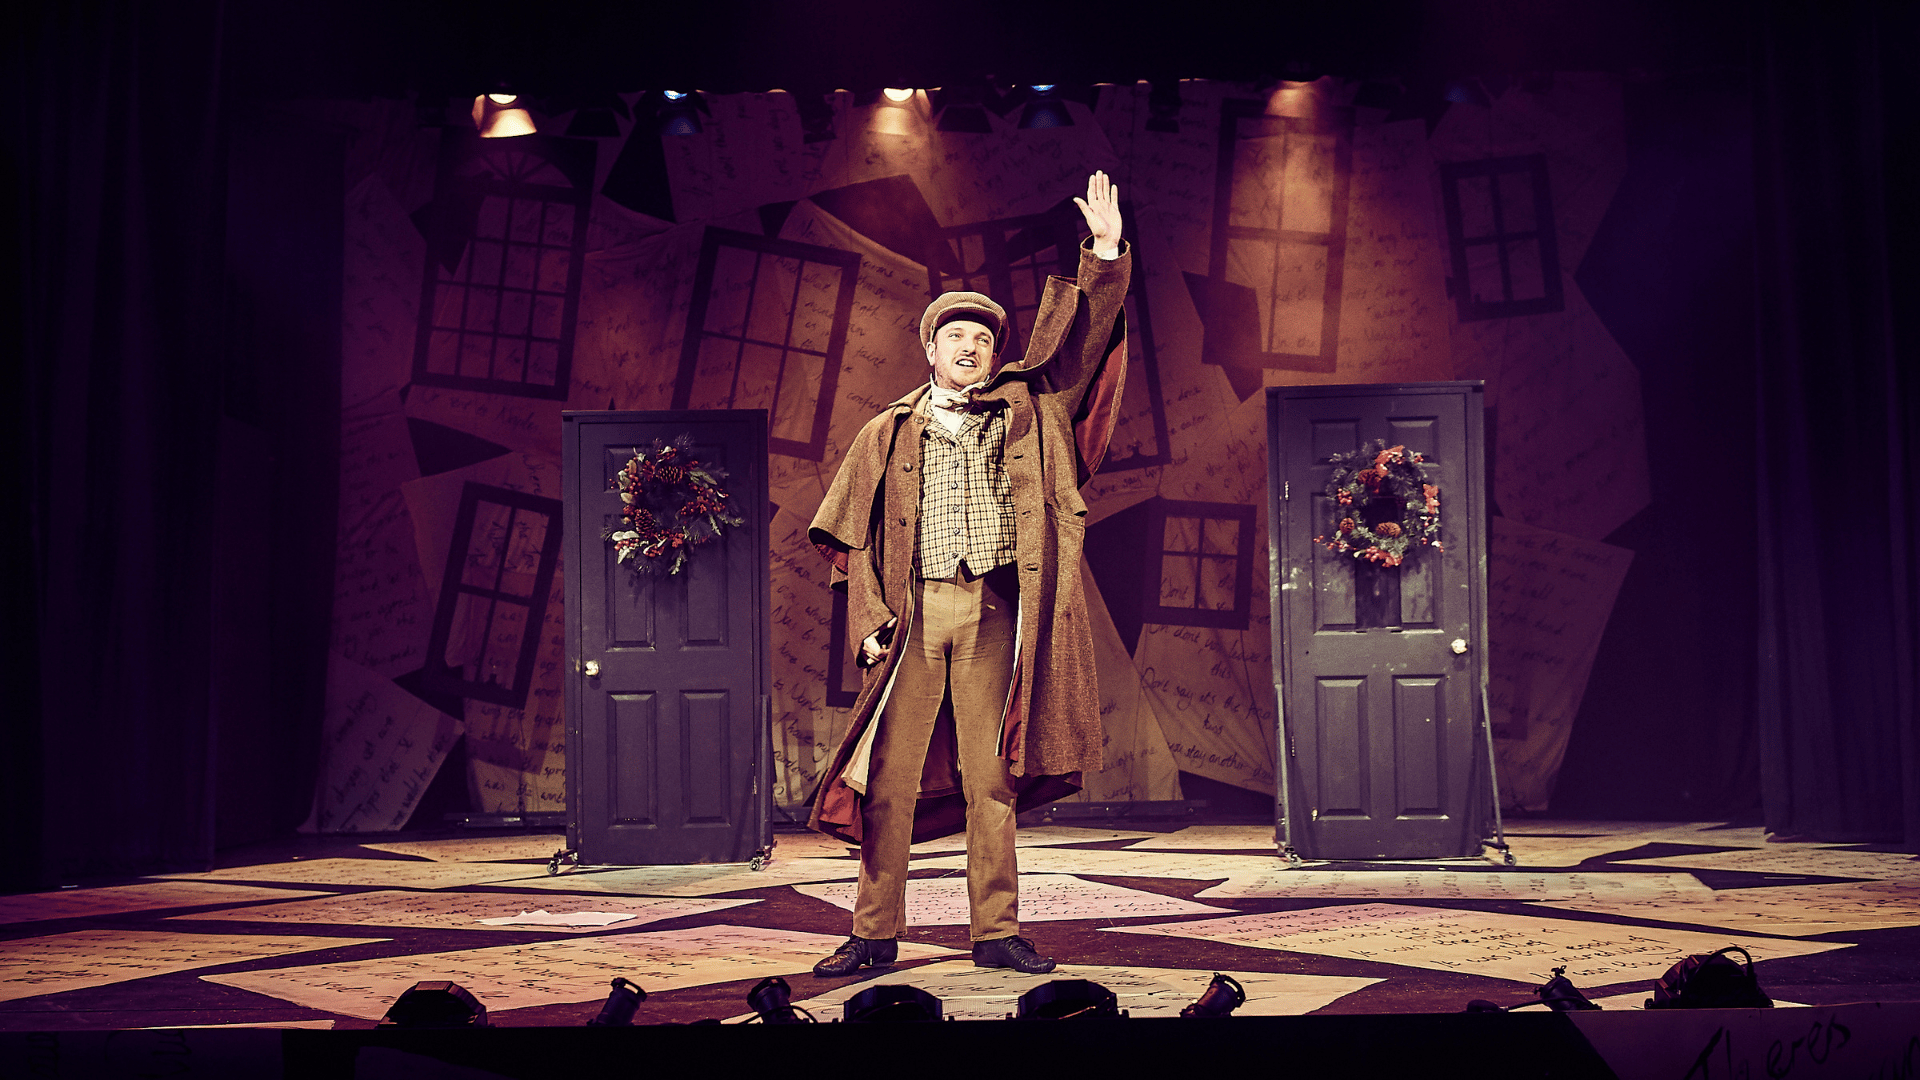 A Christmas Carol production shot: a character is stood in the centre waving at the audience. In the background, there are 2 doors decorated with Christmas wreaths